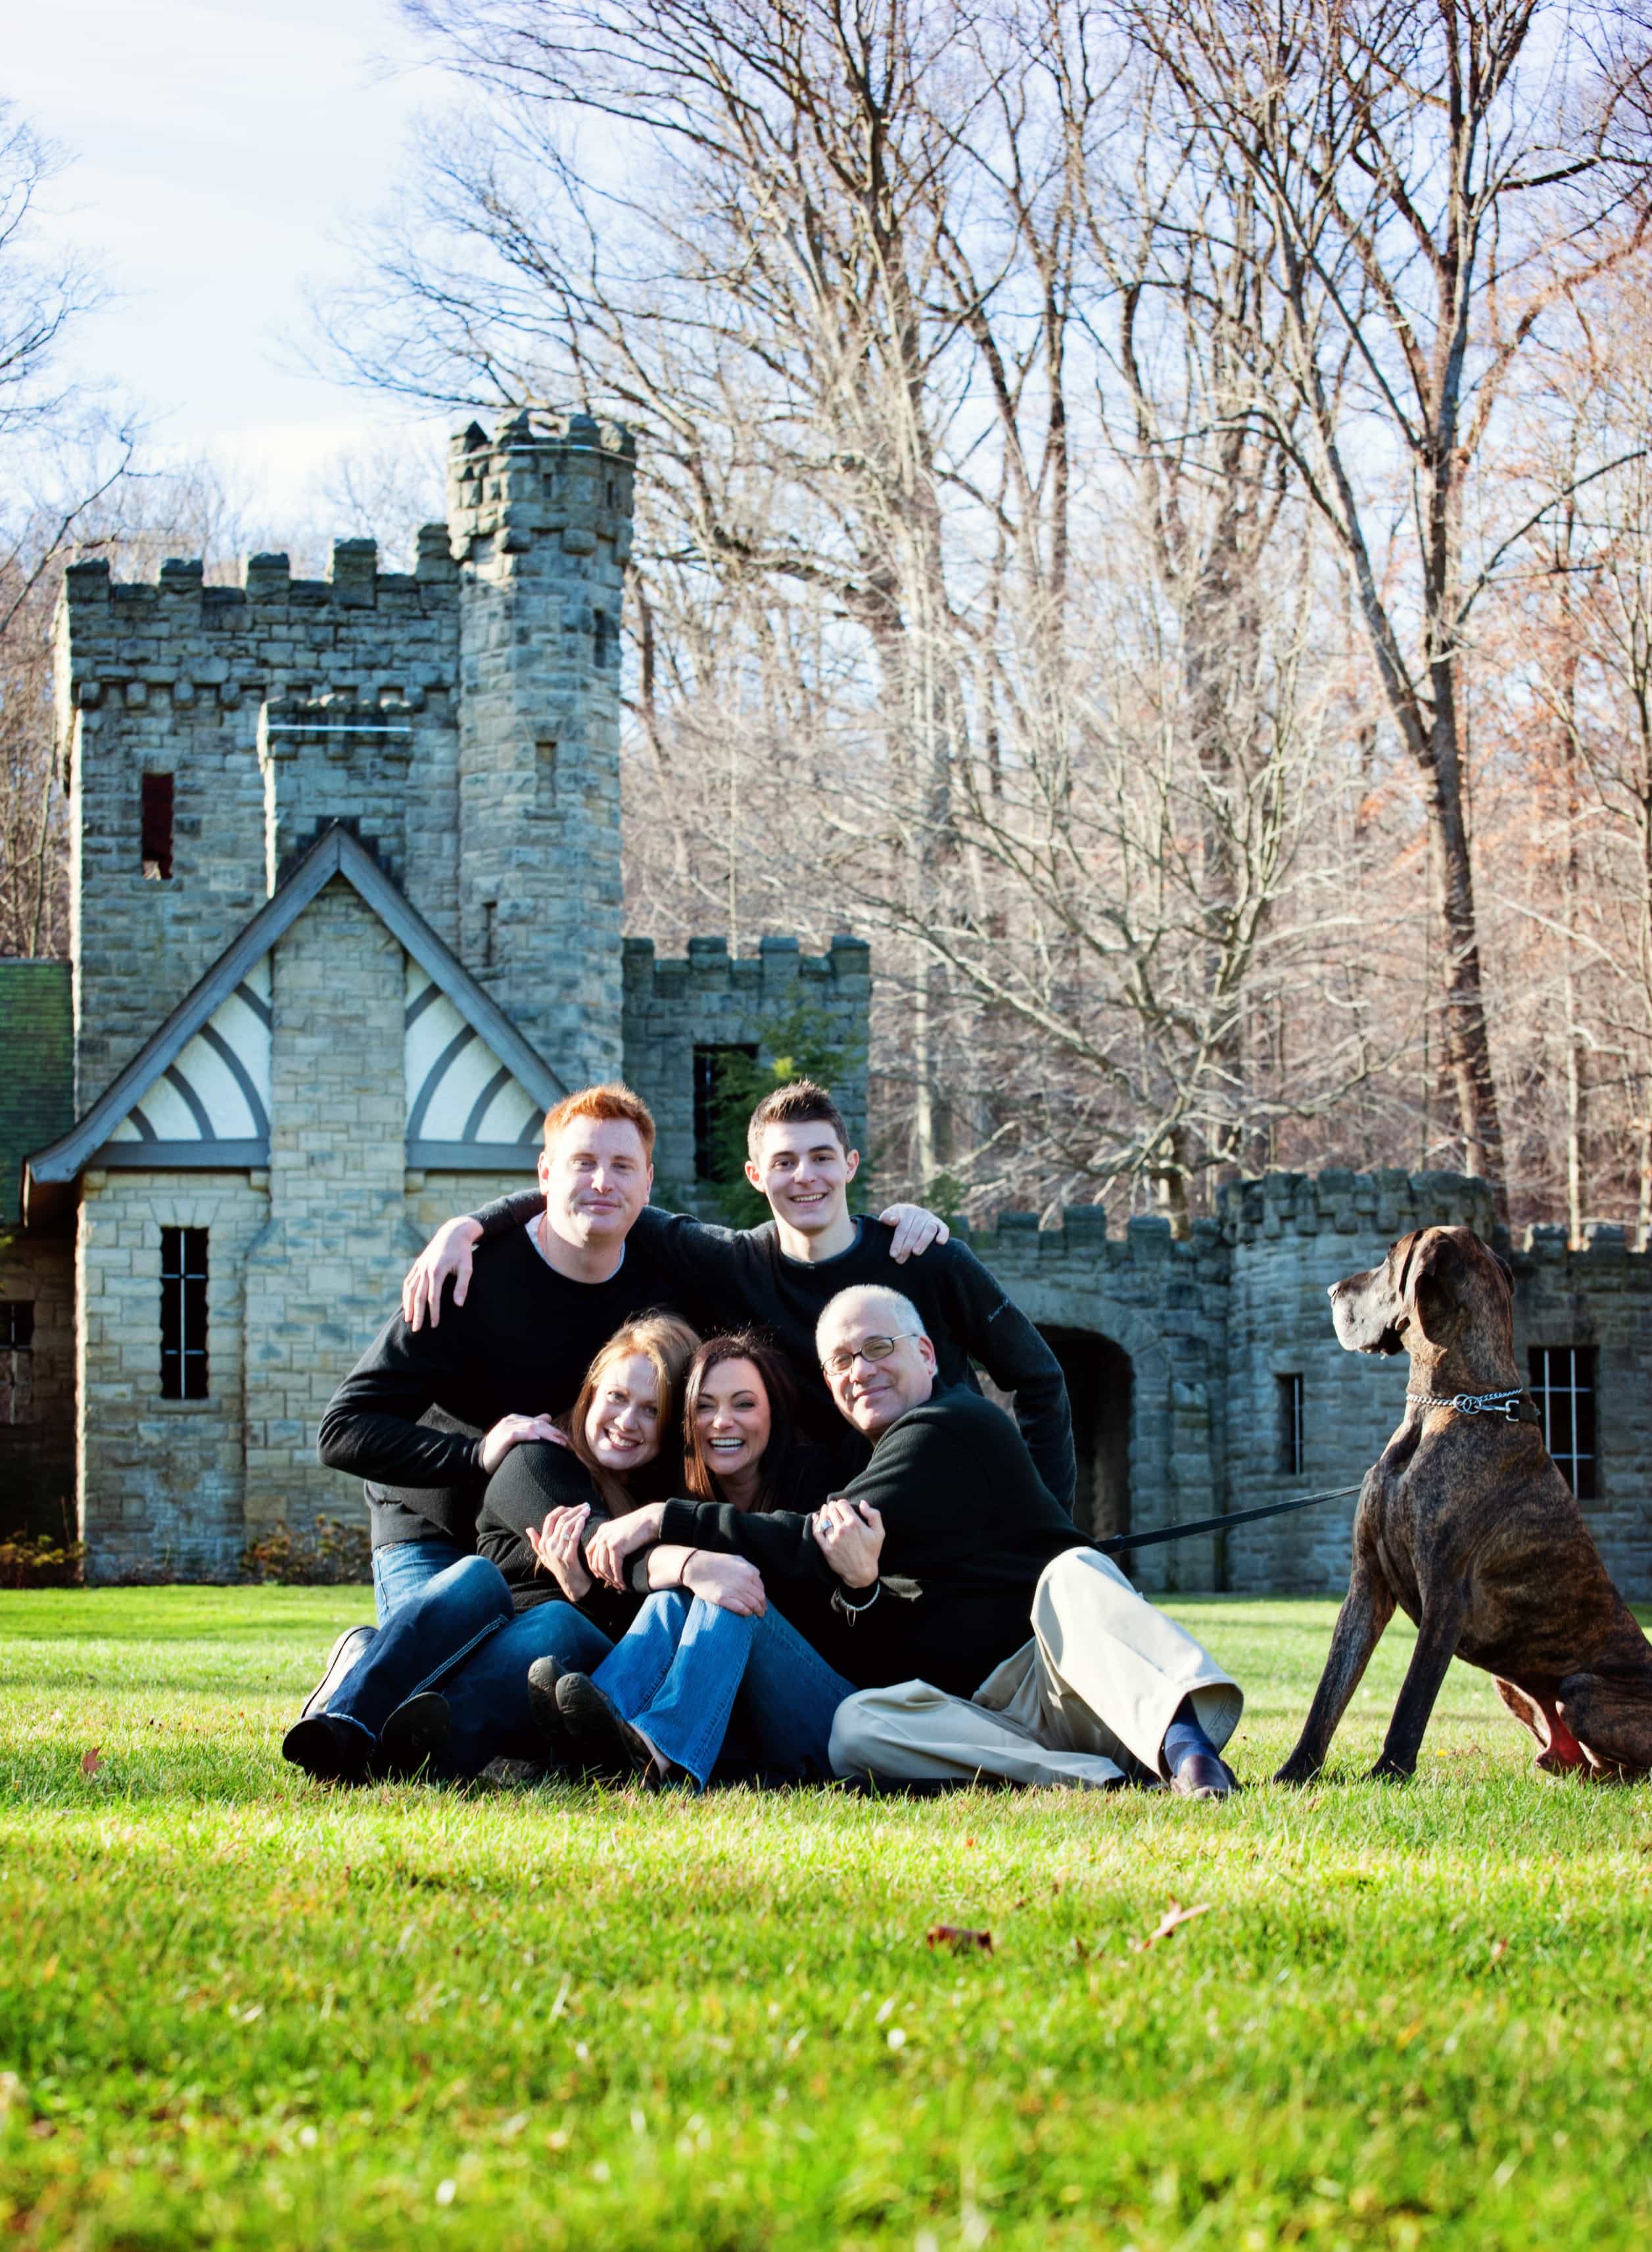 Winter Family Photo at Squires Castle, Cleveland